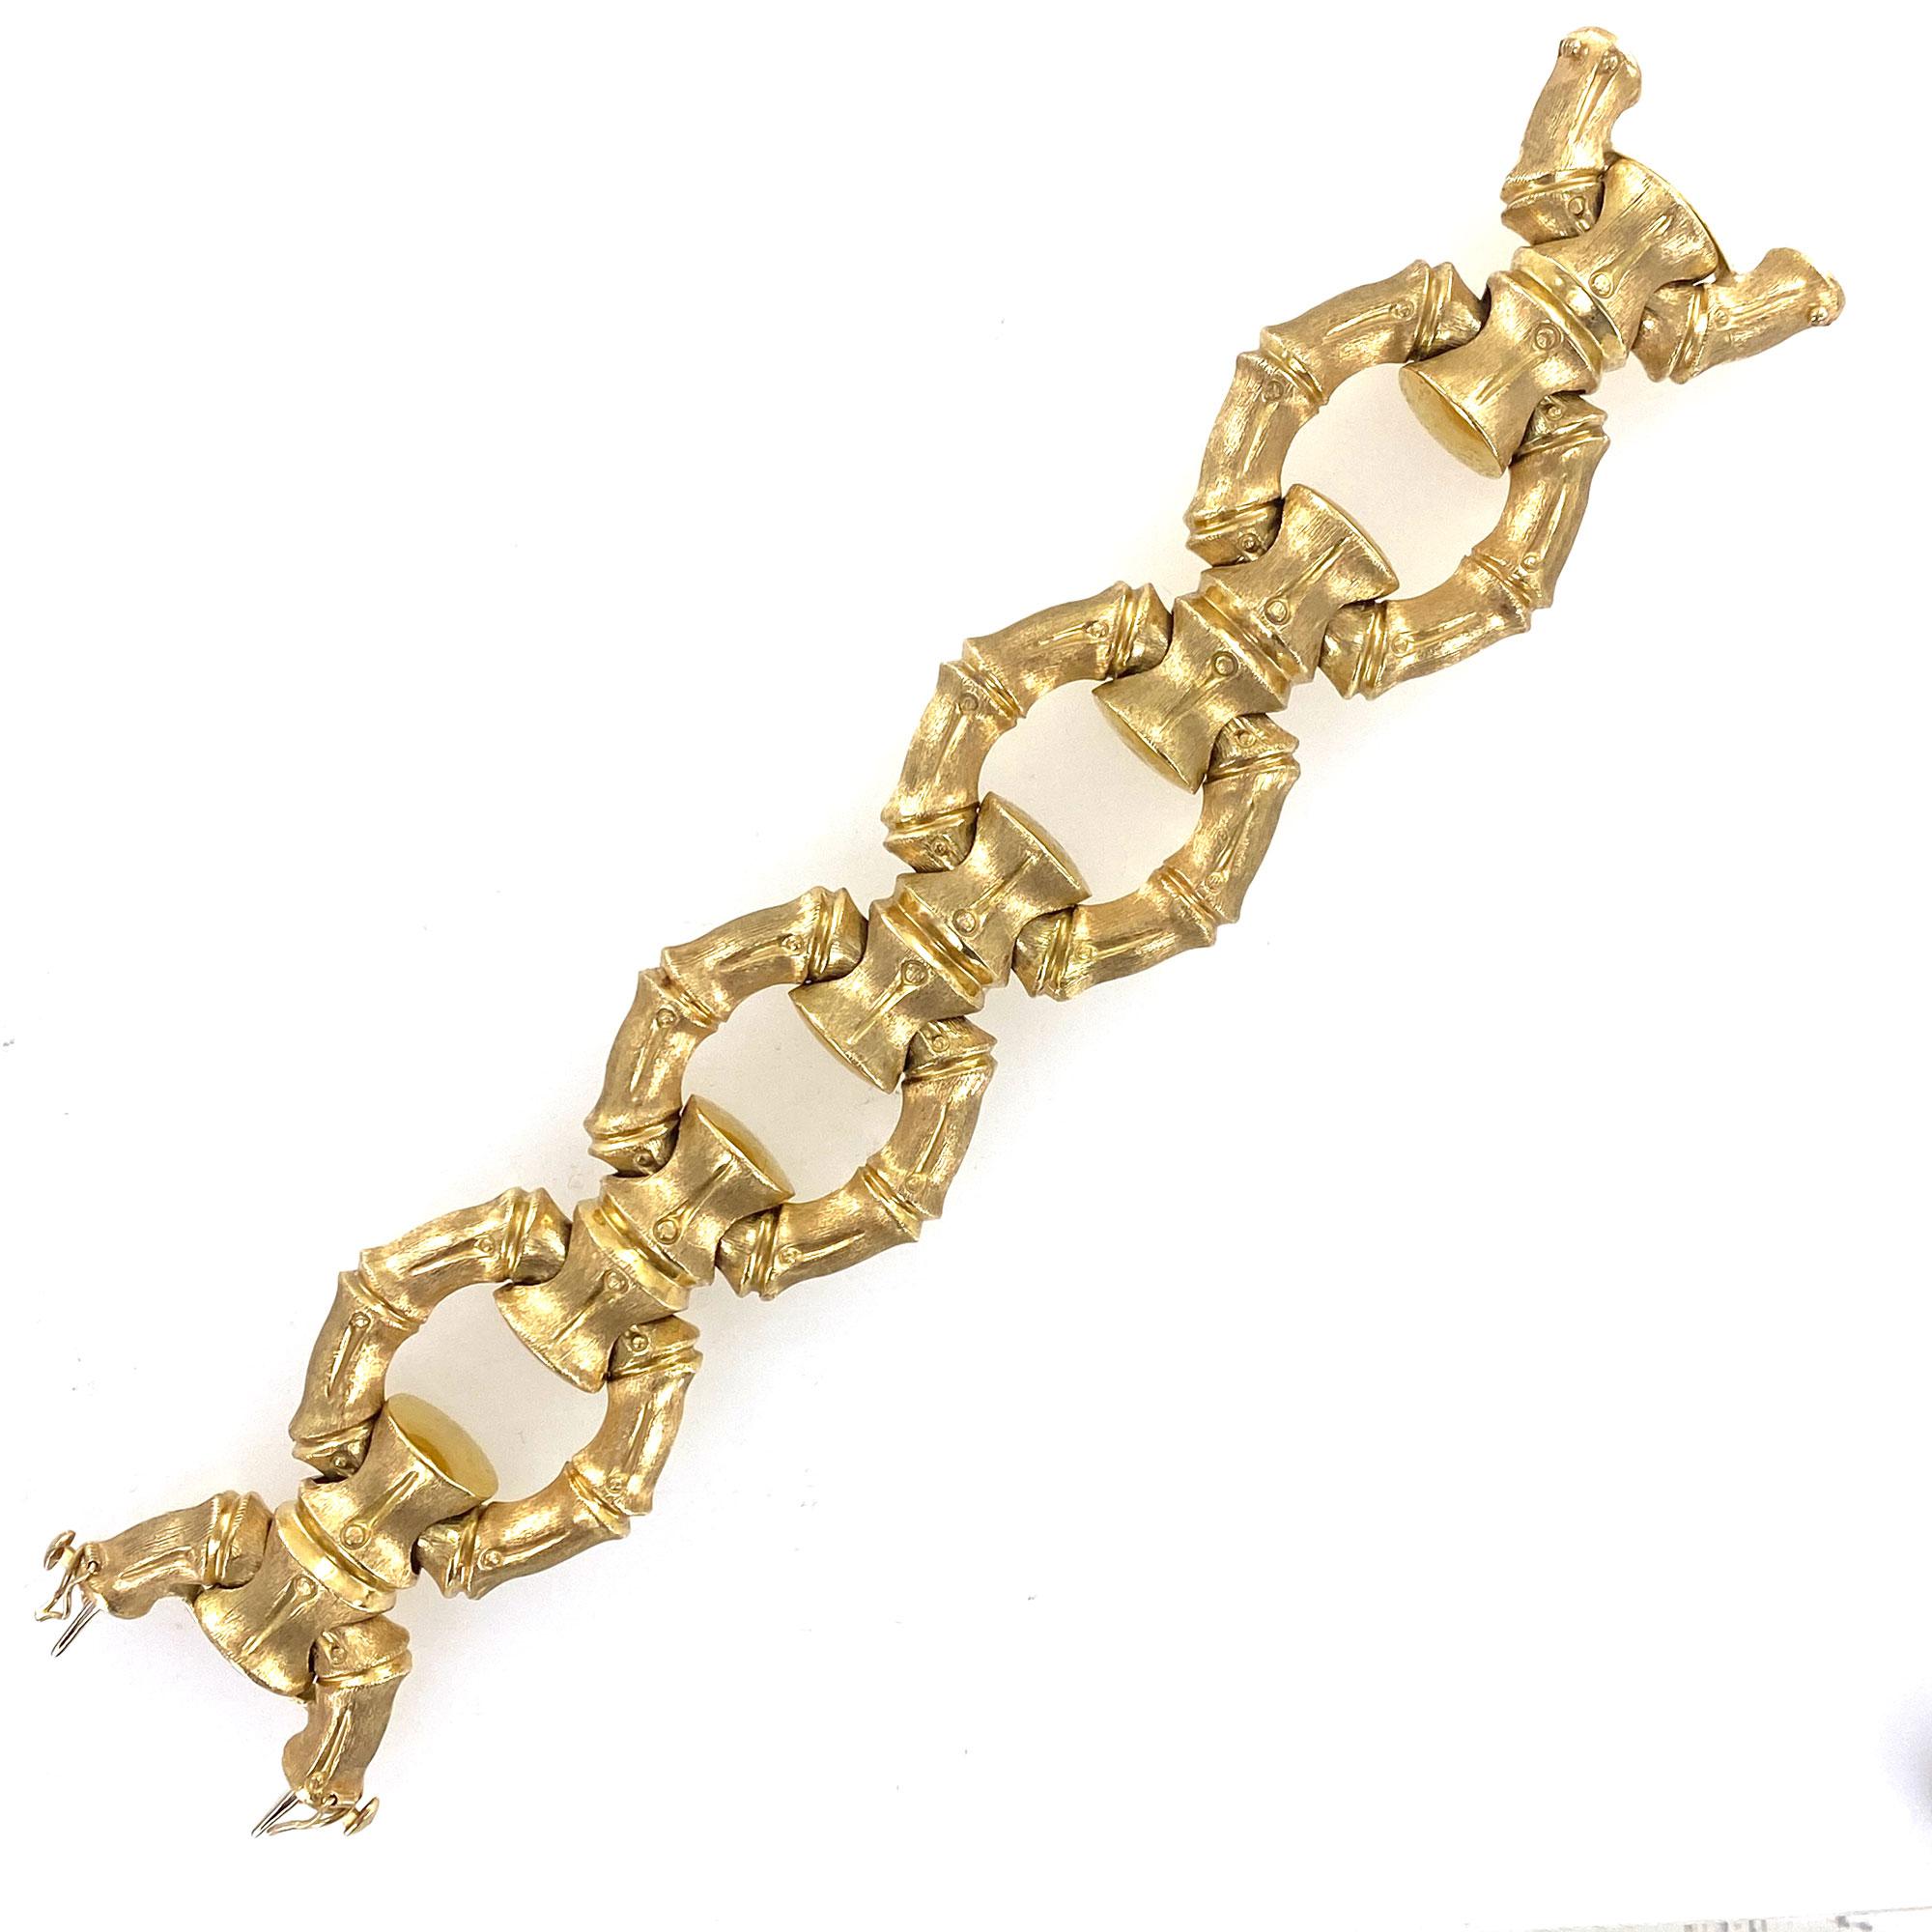 Fabulous bamboo link bracelet by Hammerman Brothers. The 1970's 18 karat yellow gold bracelet features a high polish side, a satin finish side, and measures 8.25 inches in length. Signed HB 18KT.